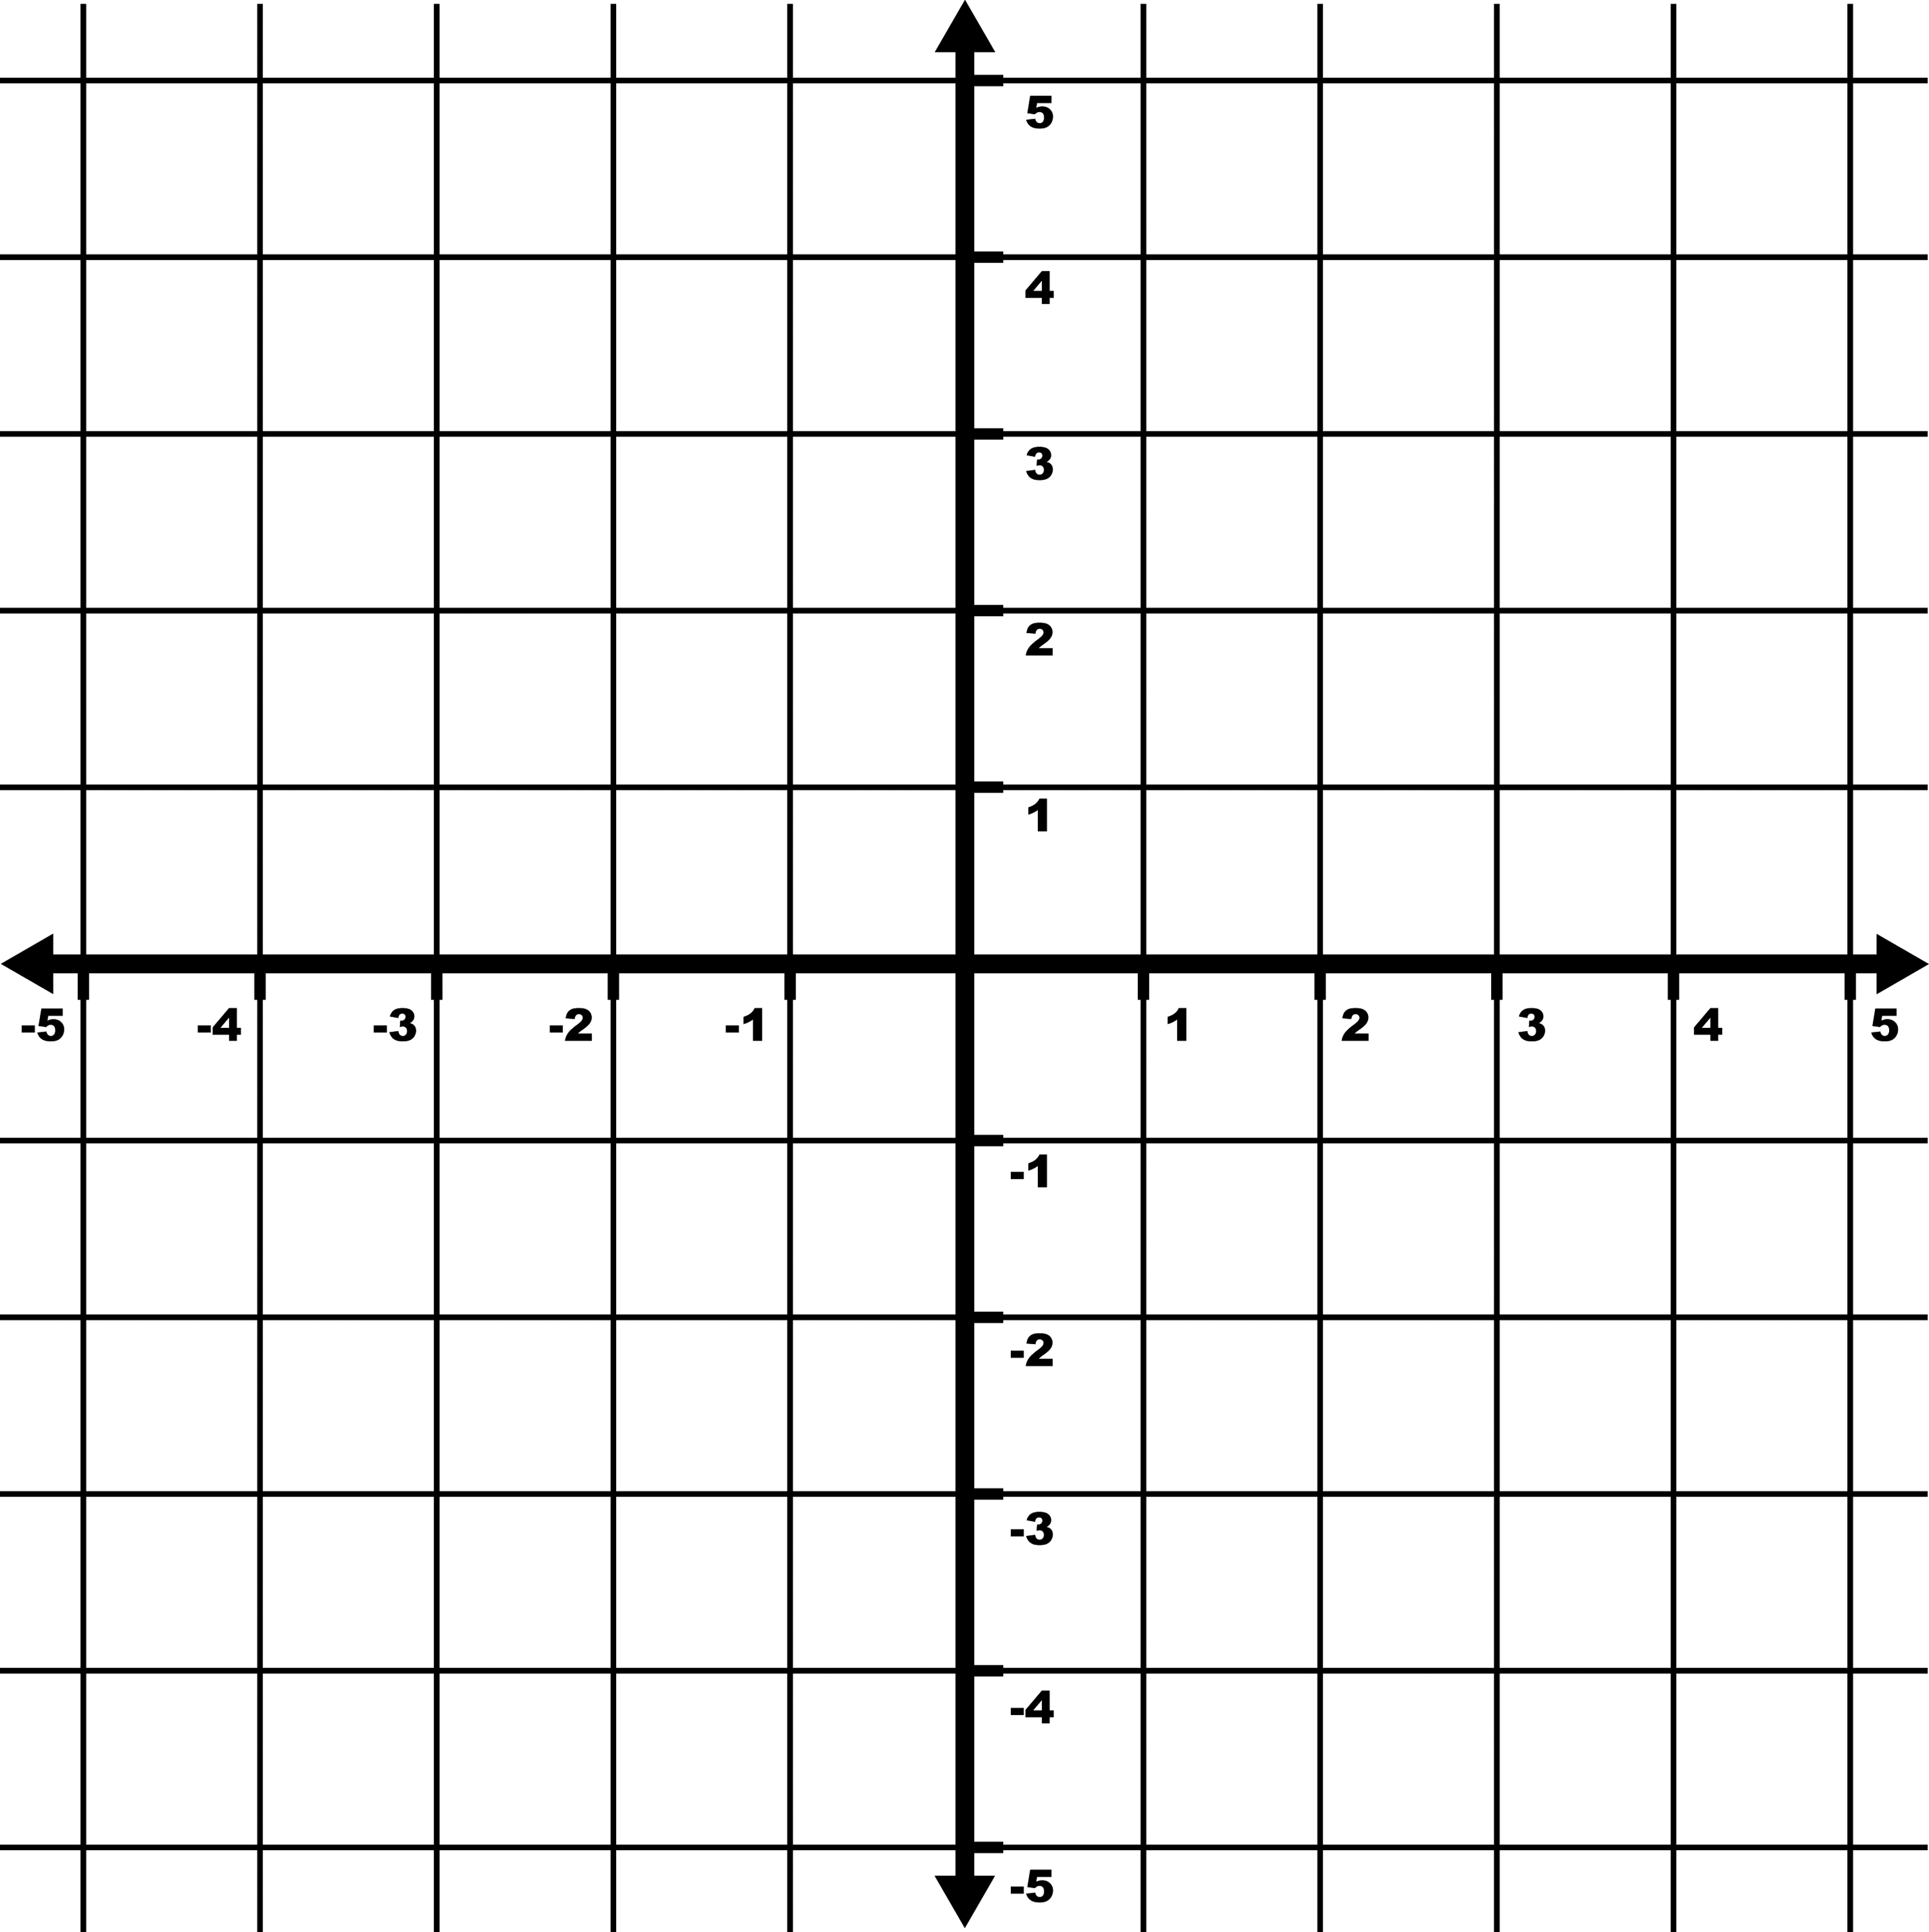 5-to-5-coordinate-grid-with-increments-labeled-and-grid-lines-shown